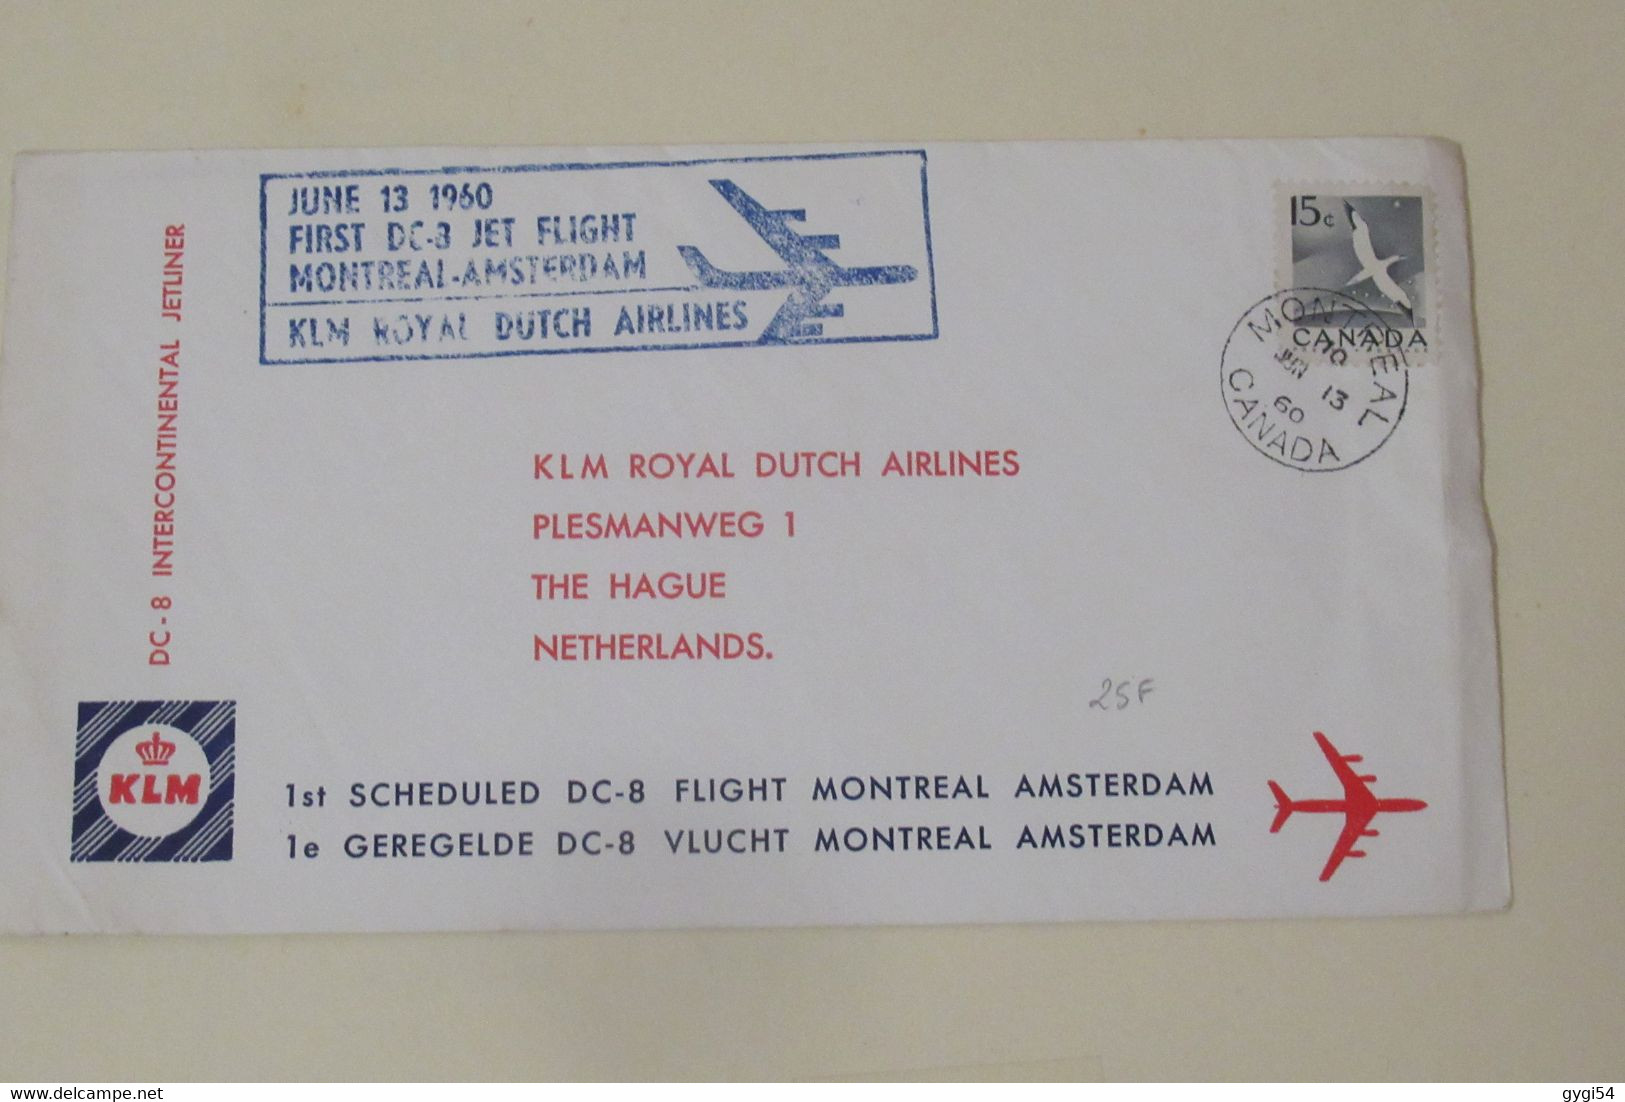 First Flight  June 13 1960 Montréal - Amsterdam By KLM Royal Dutch Airlines - First Flight Covers